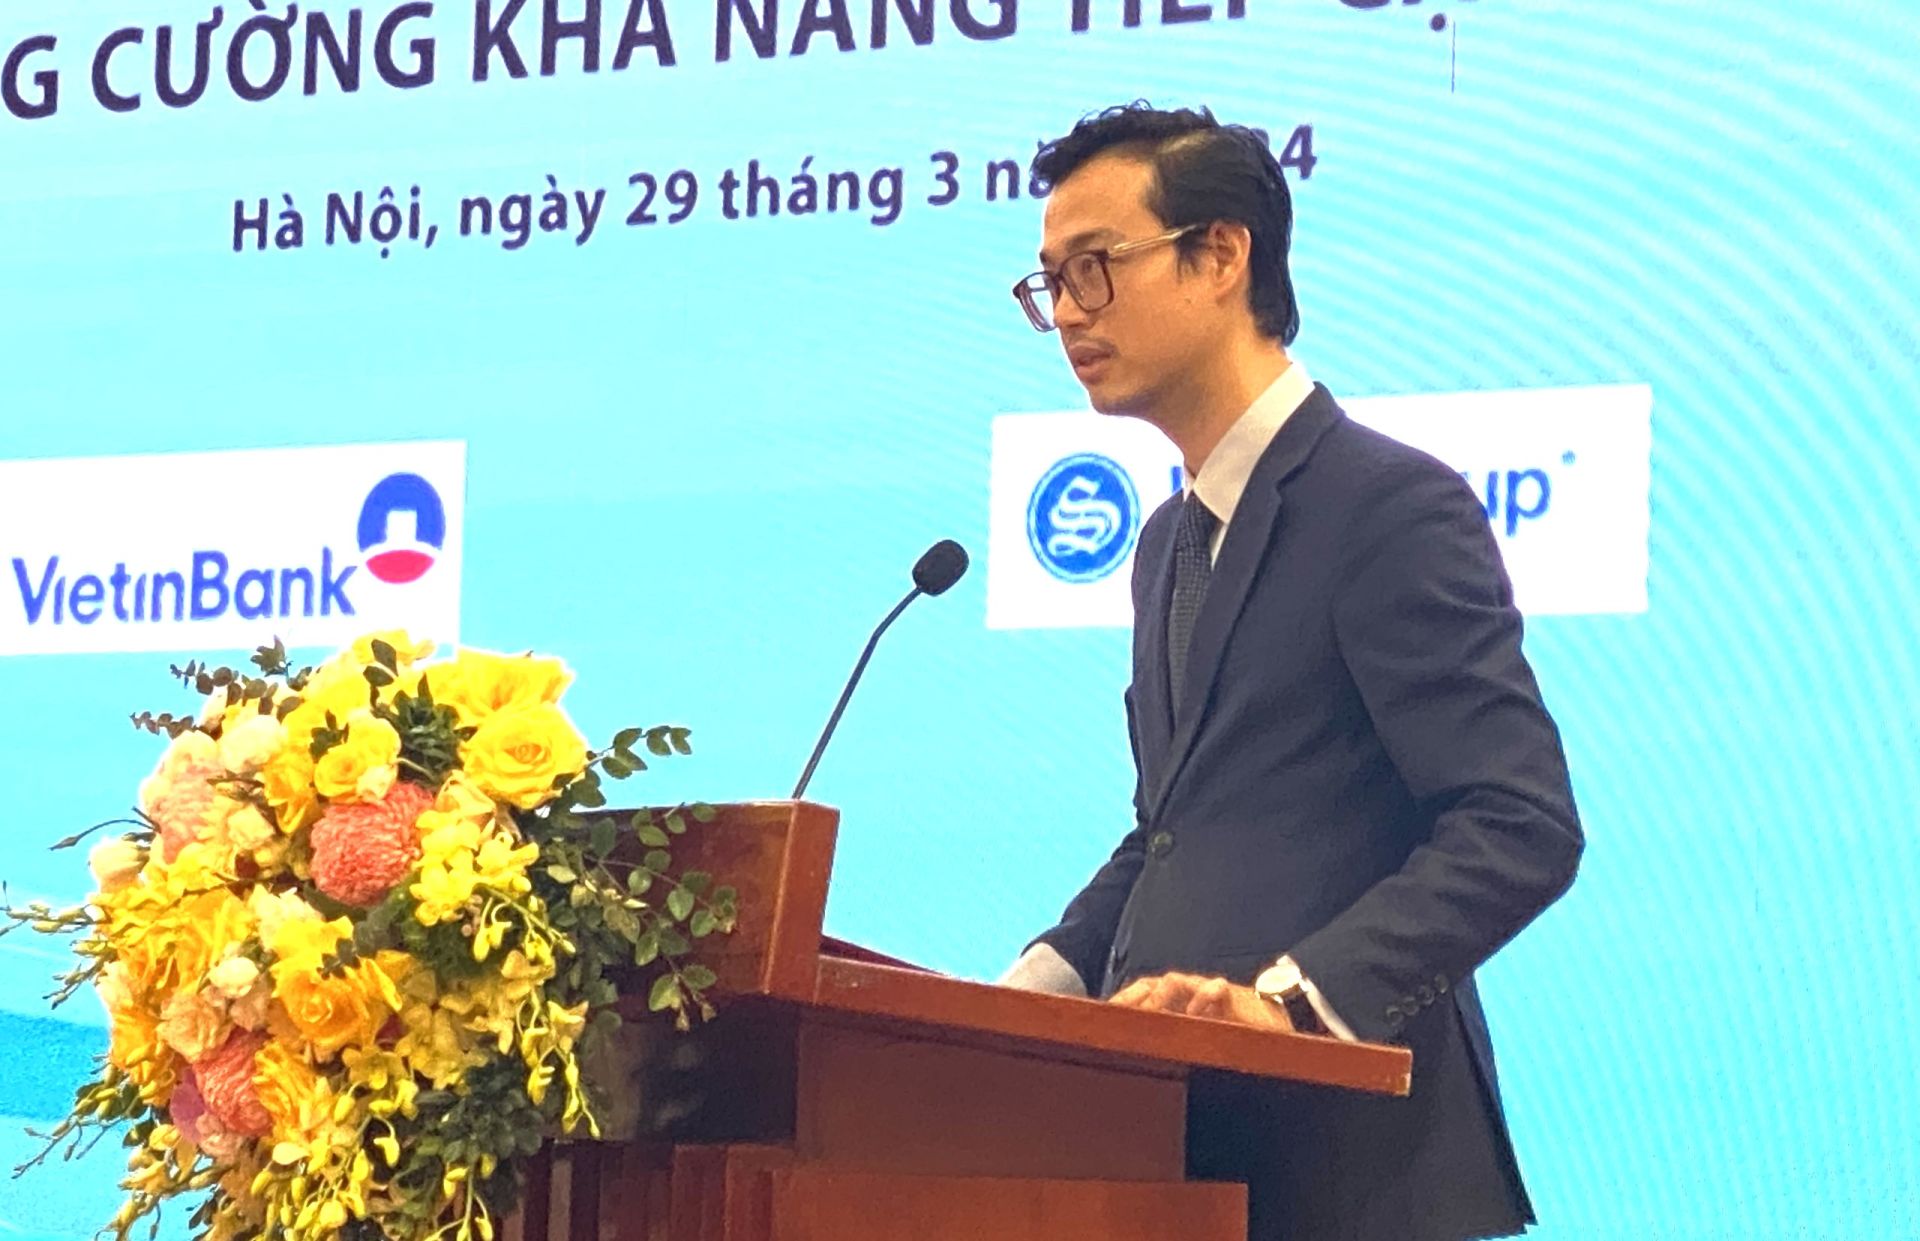 Mr To Quoc Hung - Country Director of ACCA Vietnam shared at the Programme